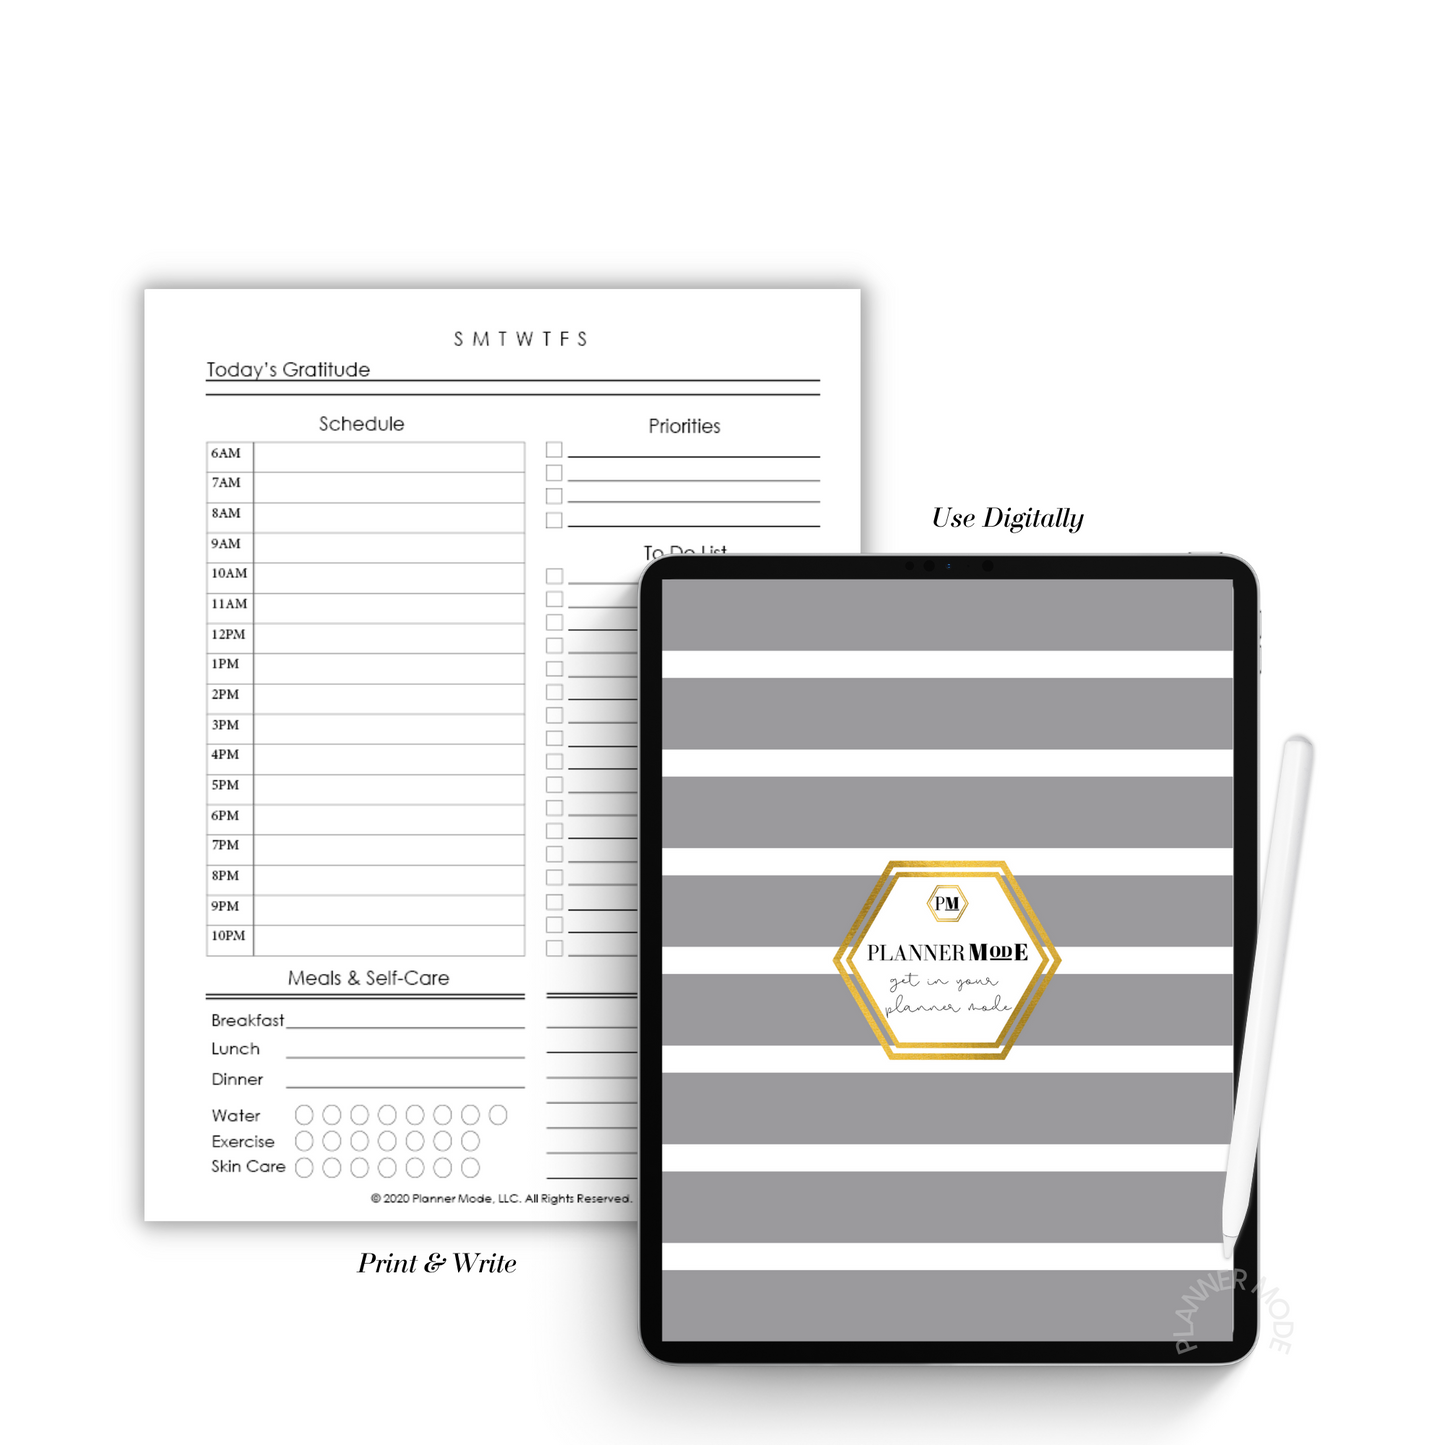 Grey Striped Lifestyle Mode Planner